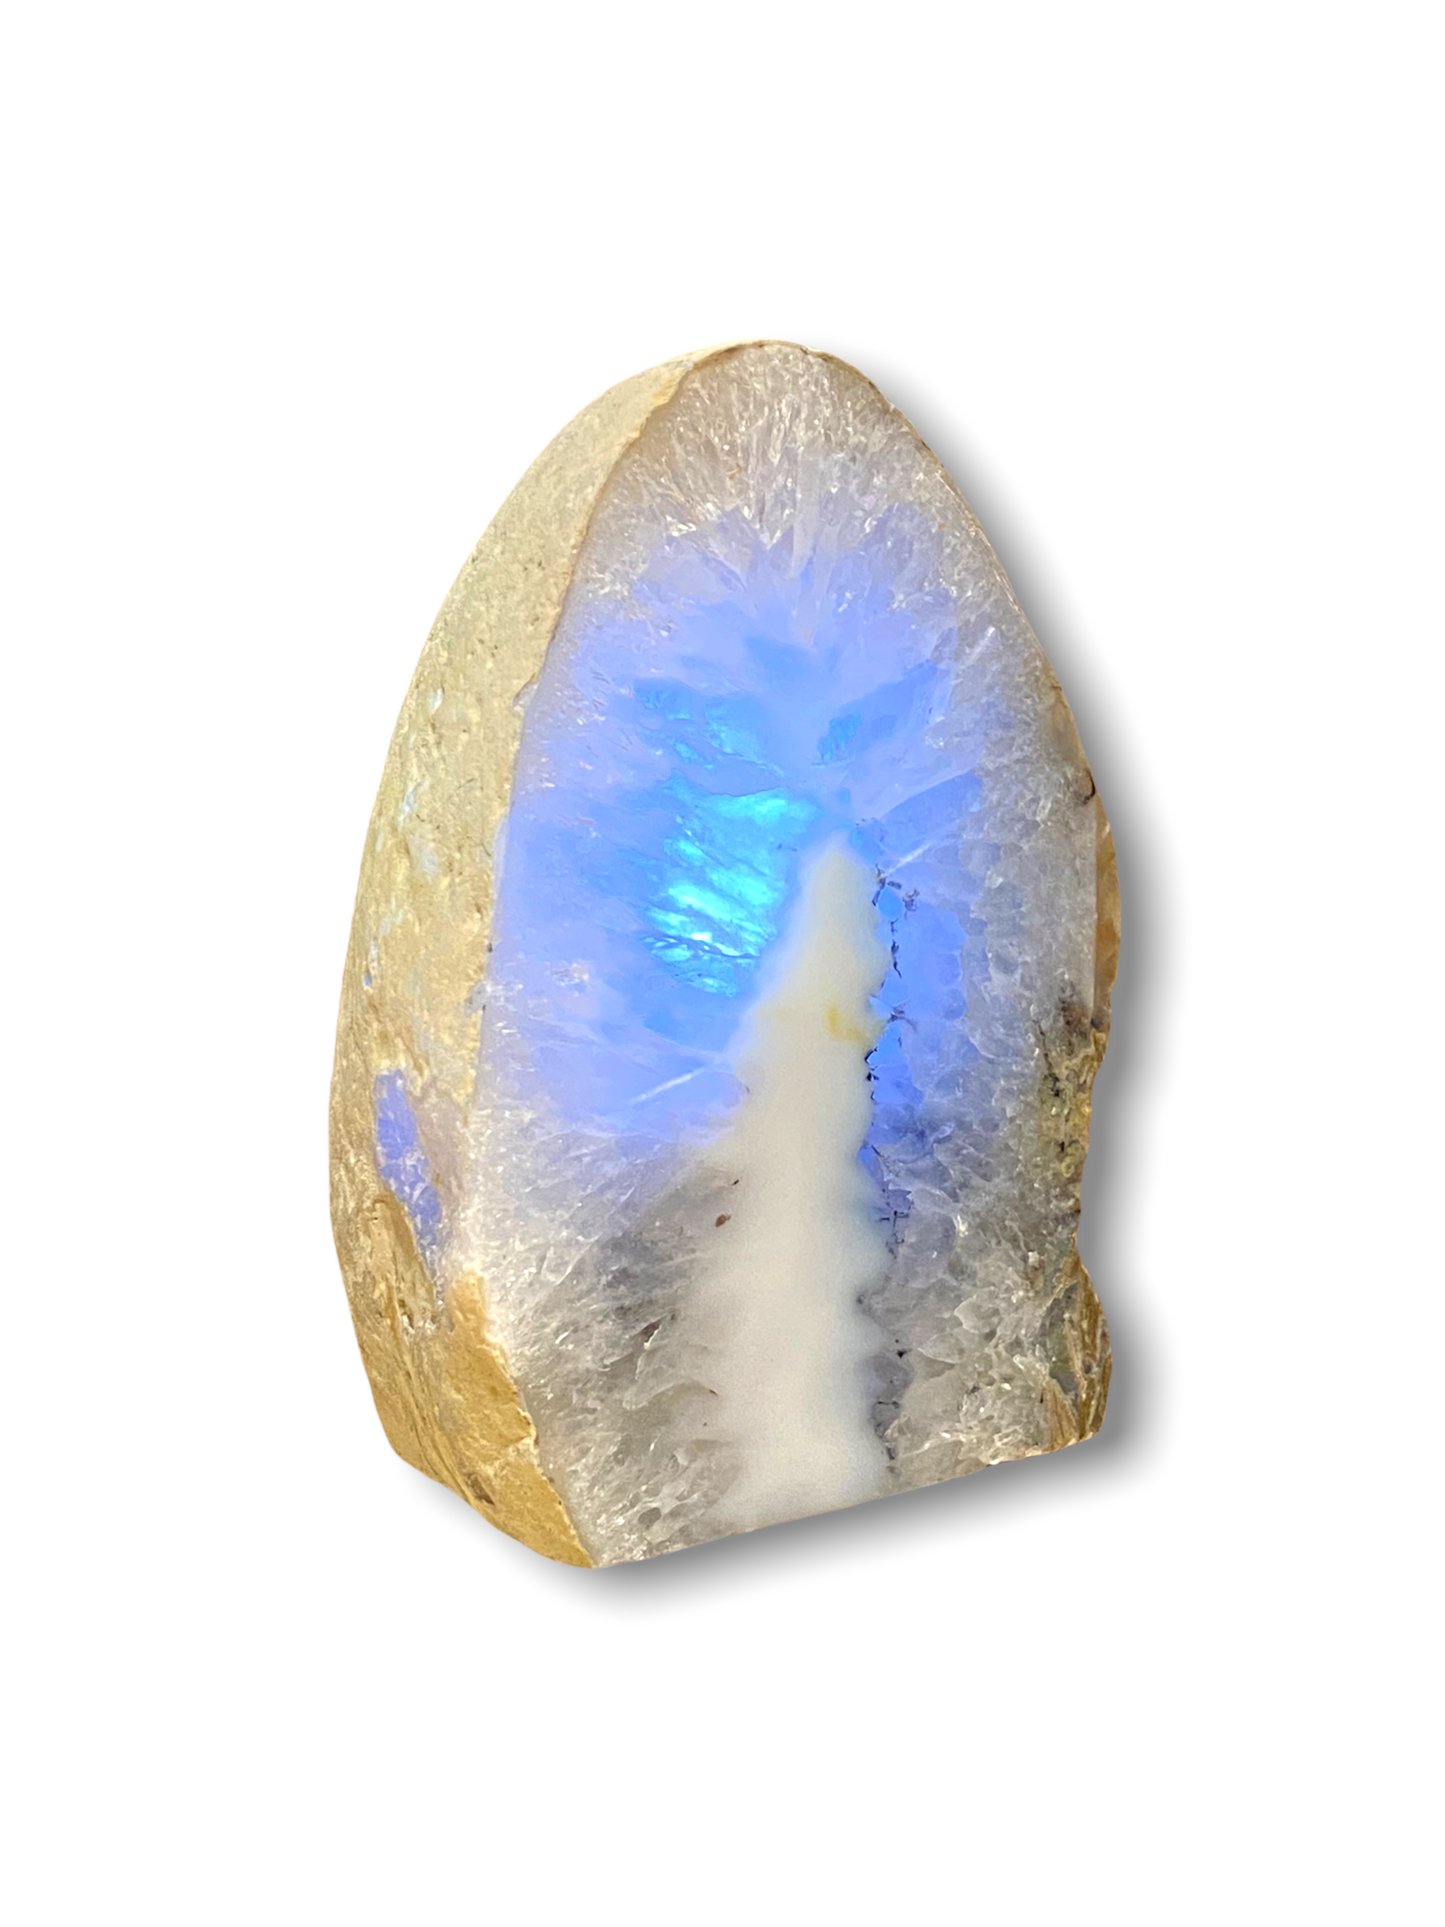 Lighted Cut Agate Geode - White - 6-1/2-in - Mellow Monkey